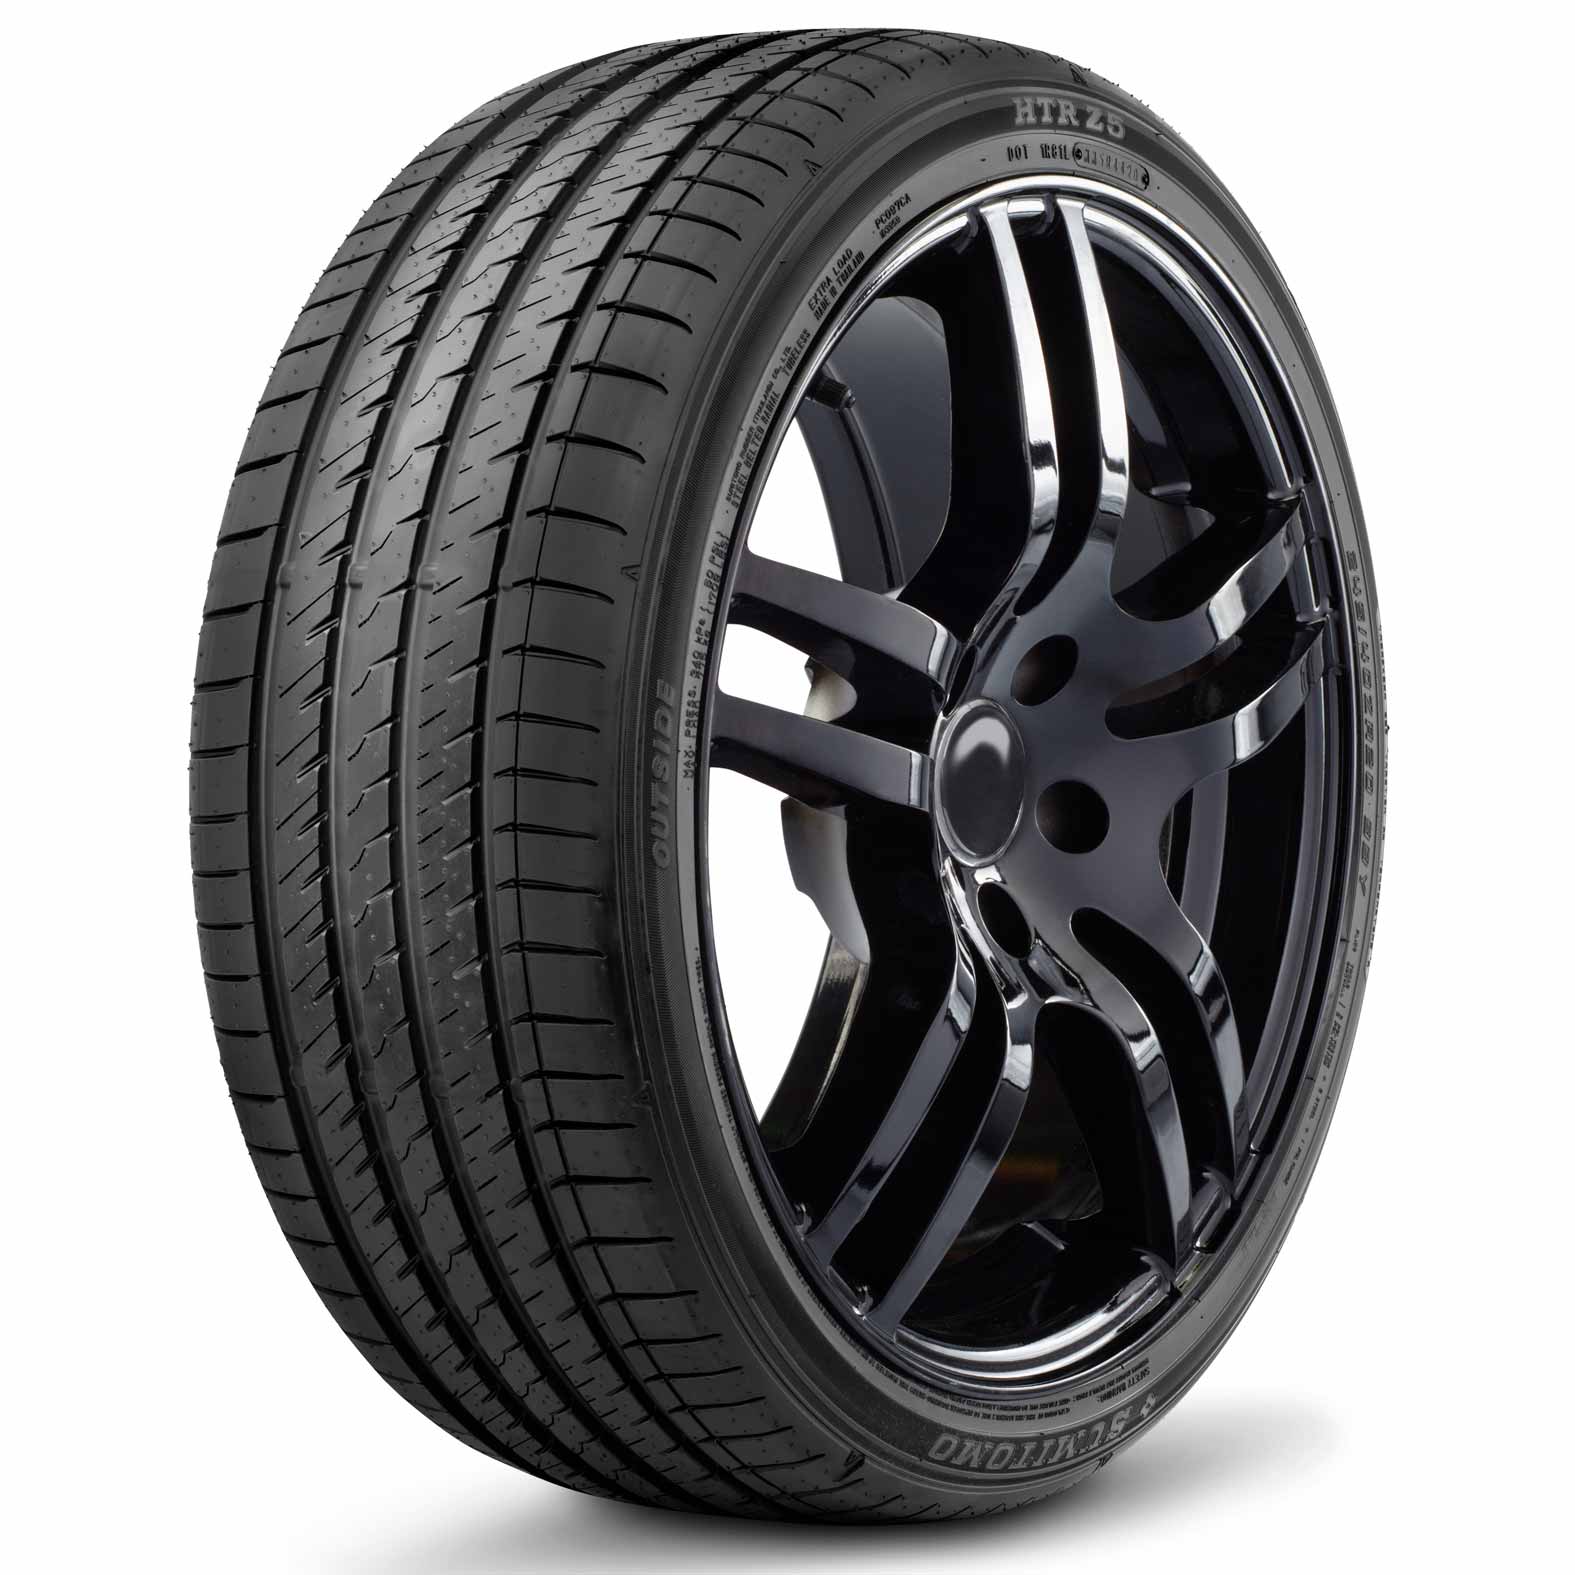 Sumitomo HTR Z5 - Tyre reviews and ratings